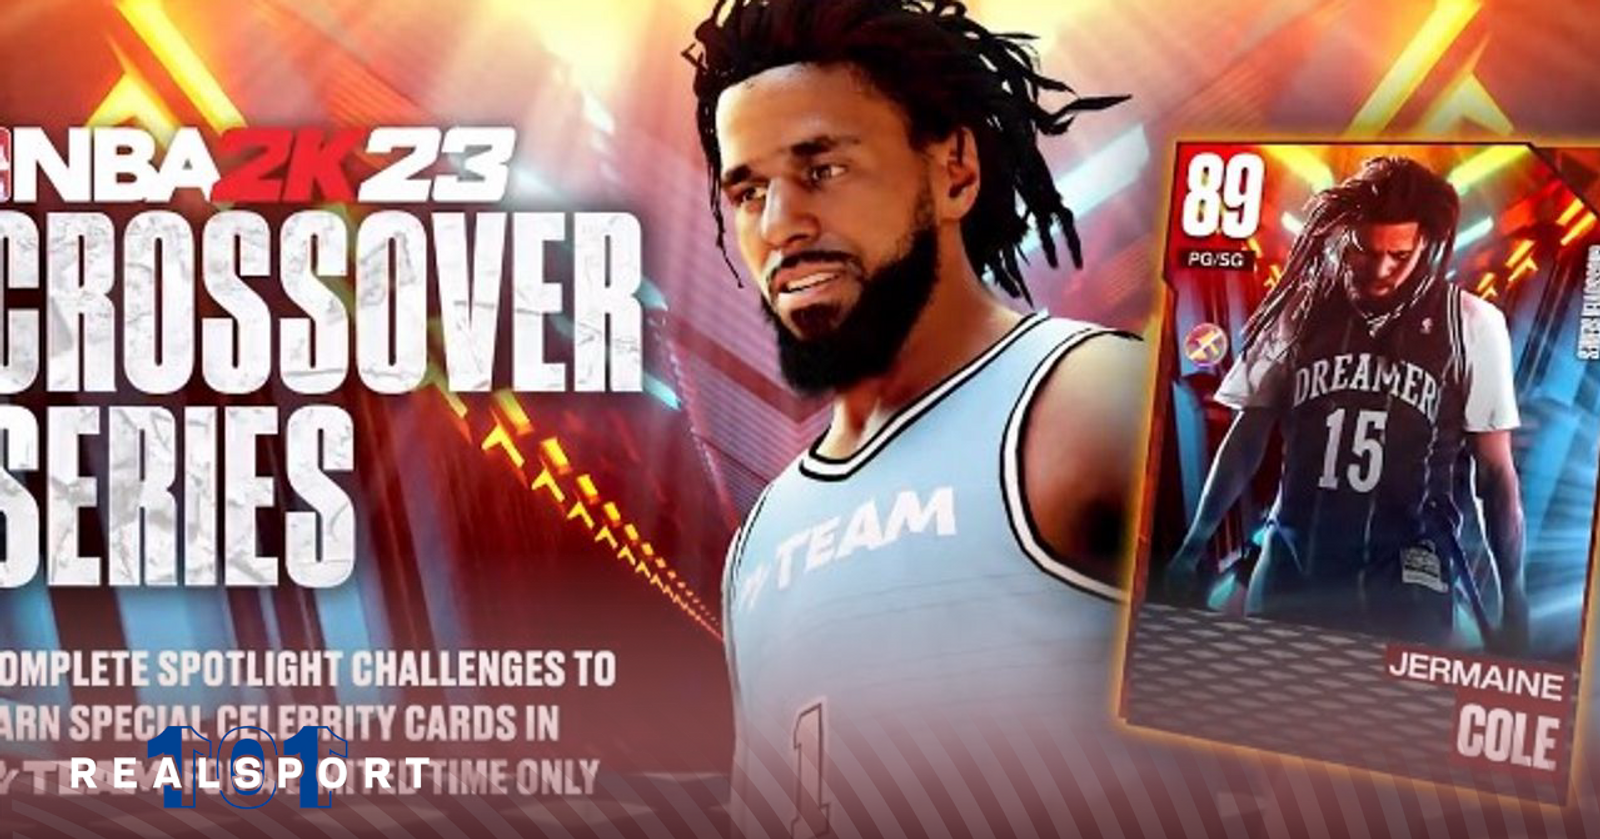 J. Cole & Jack Harlow Are Playable Characters In 'NBA 2K23